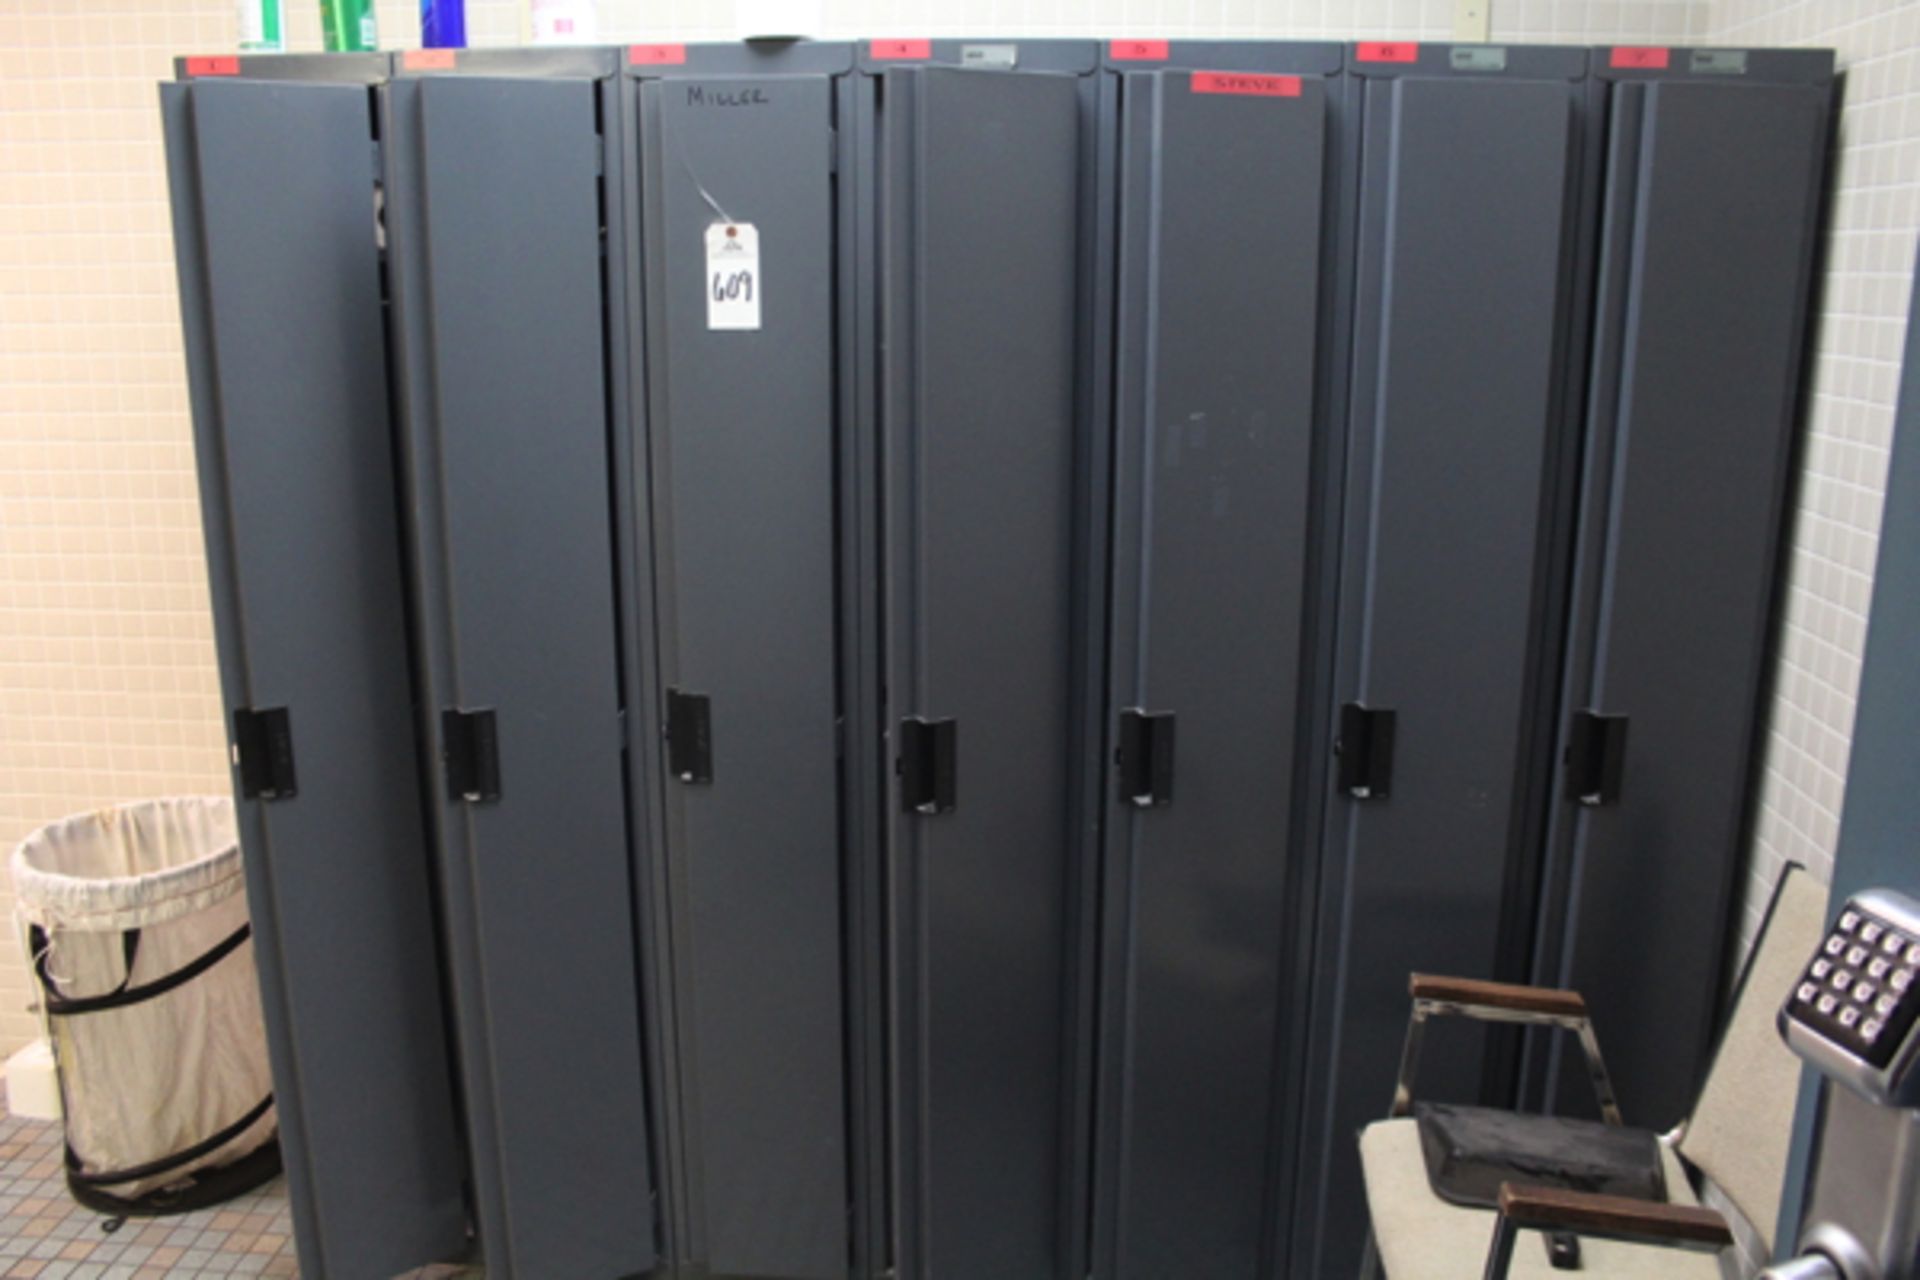 Lot of Employee Lockers | Location: Administration Building